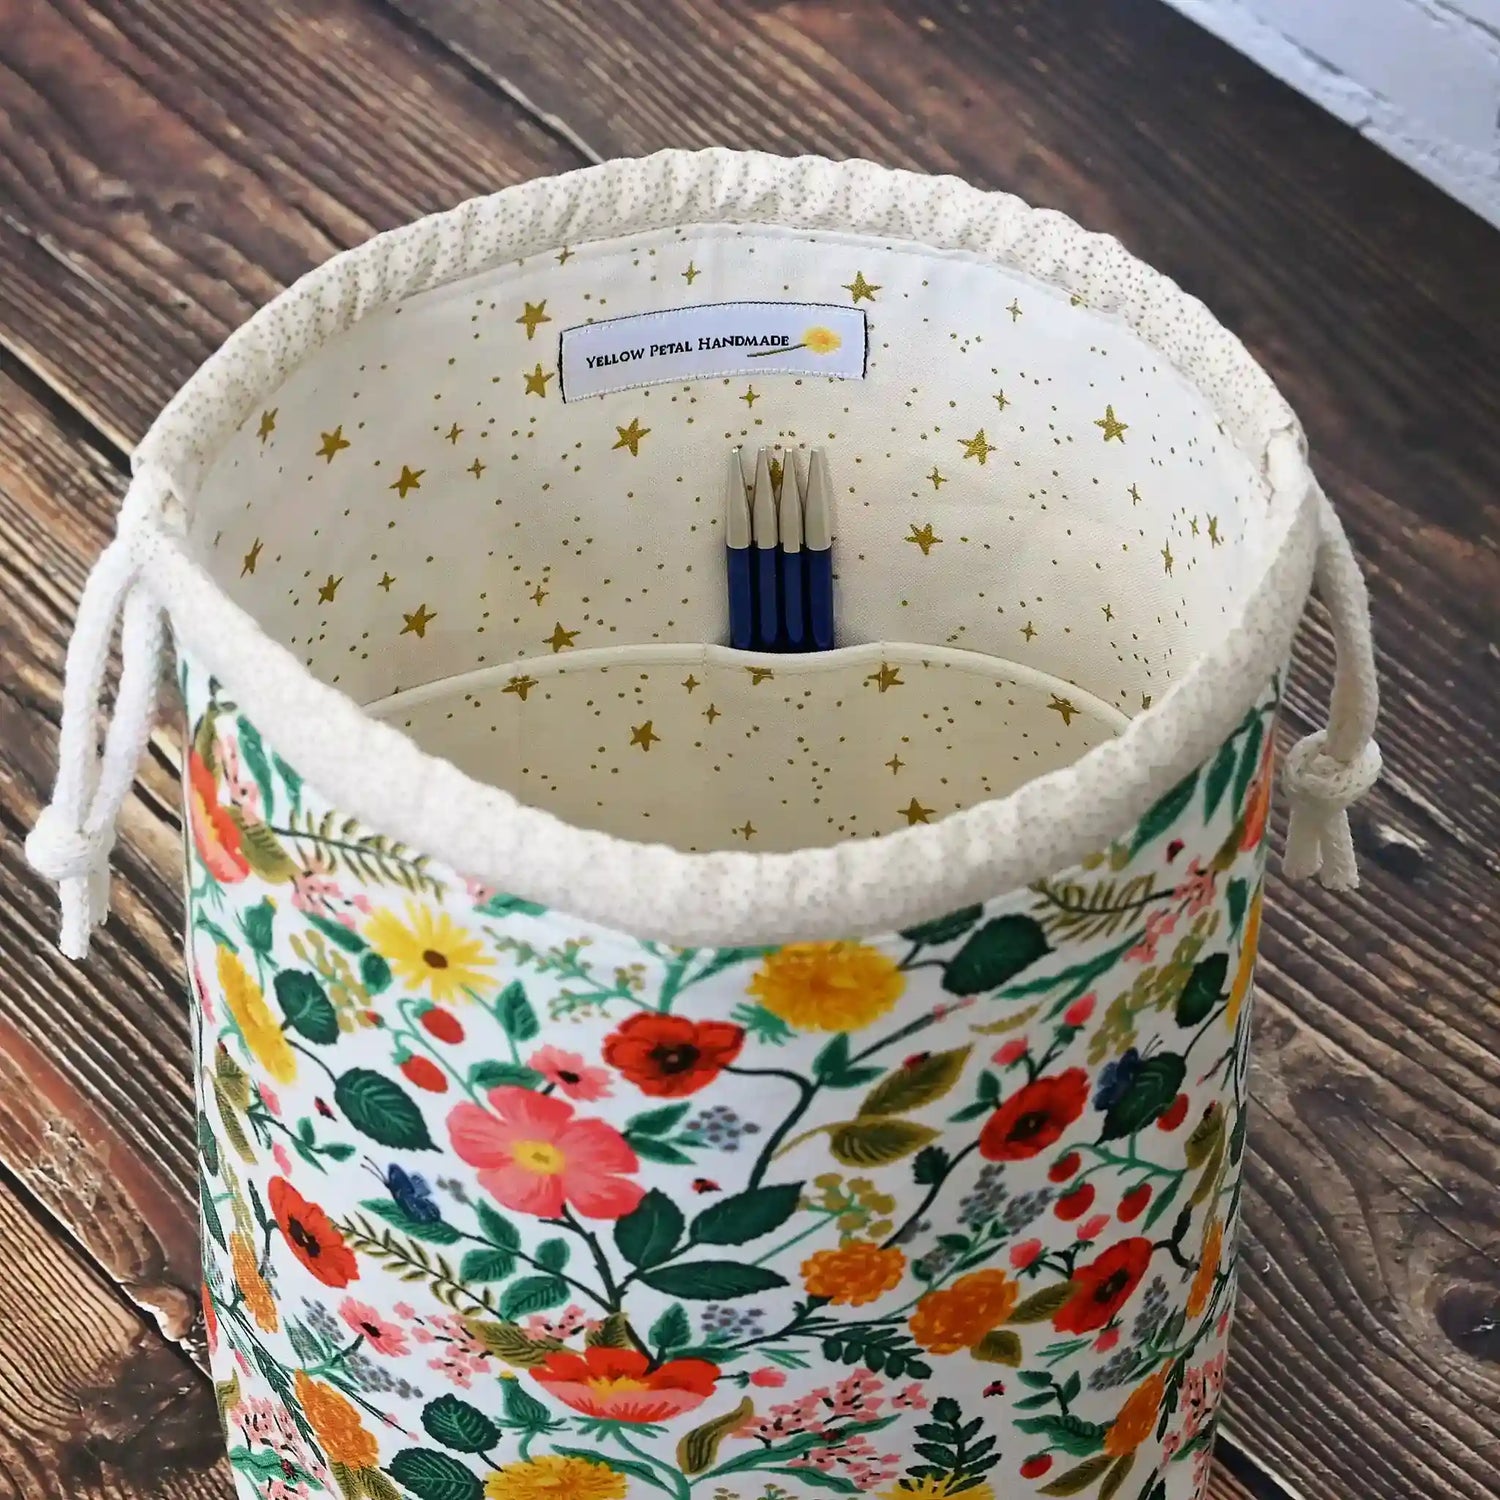 Pretty drawstring project bag.  Made from Rifle Paper Camont Fabric and lined in a pretty cream with gold stars.  Made in Canada by Yellow Petal Handmade.